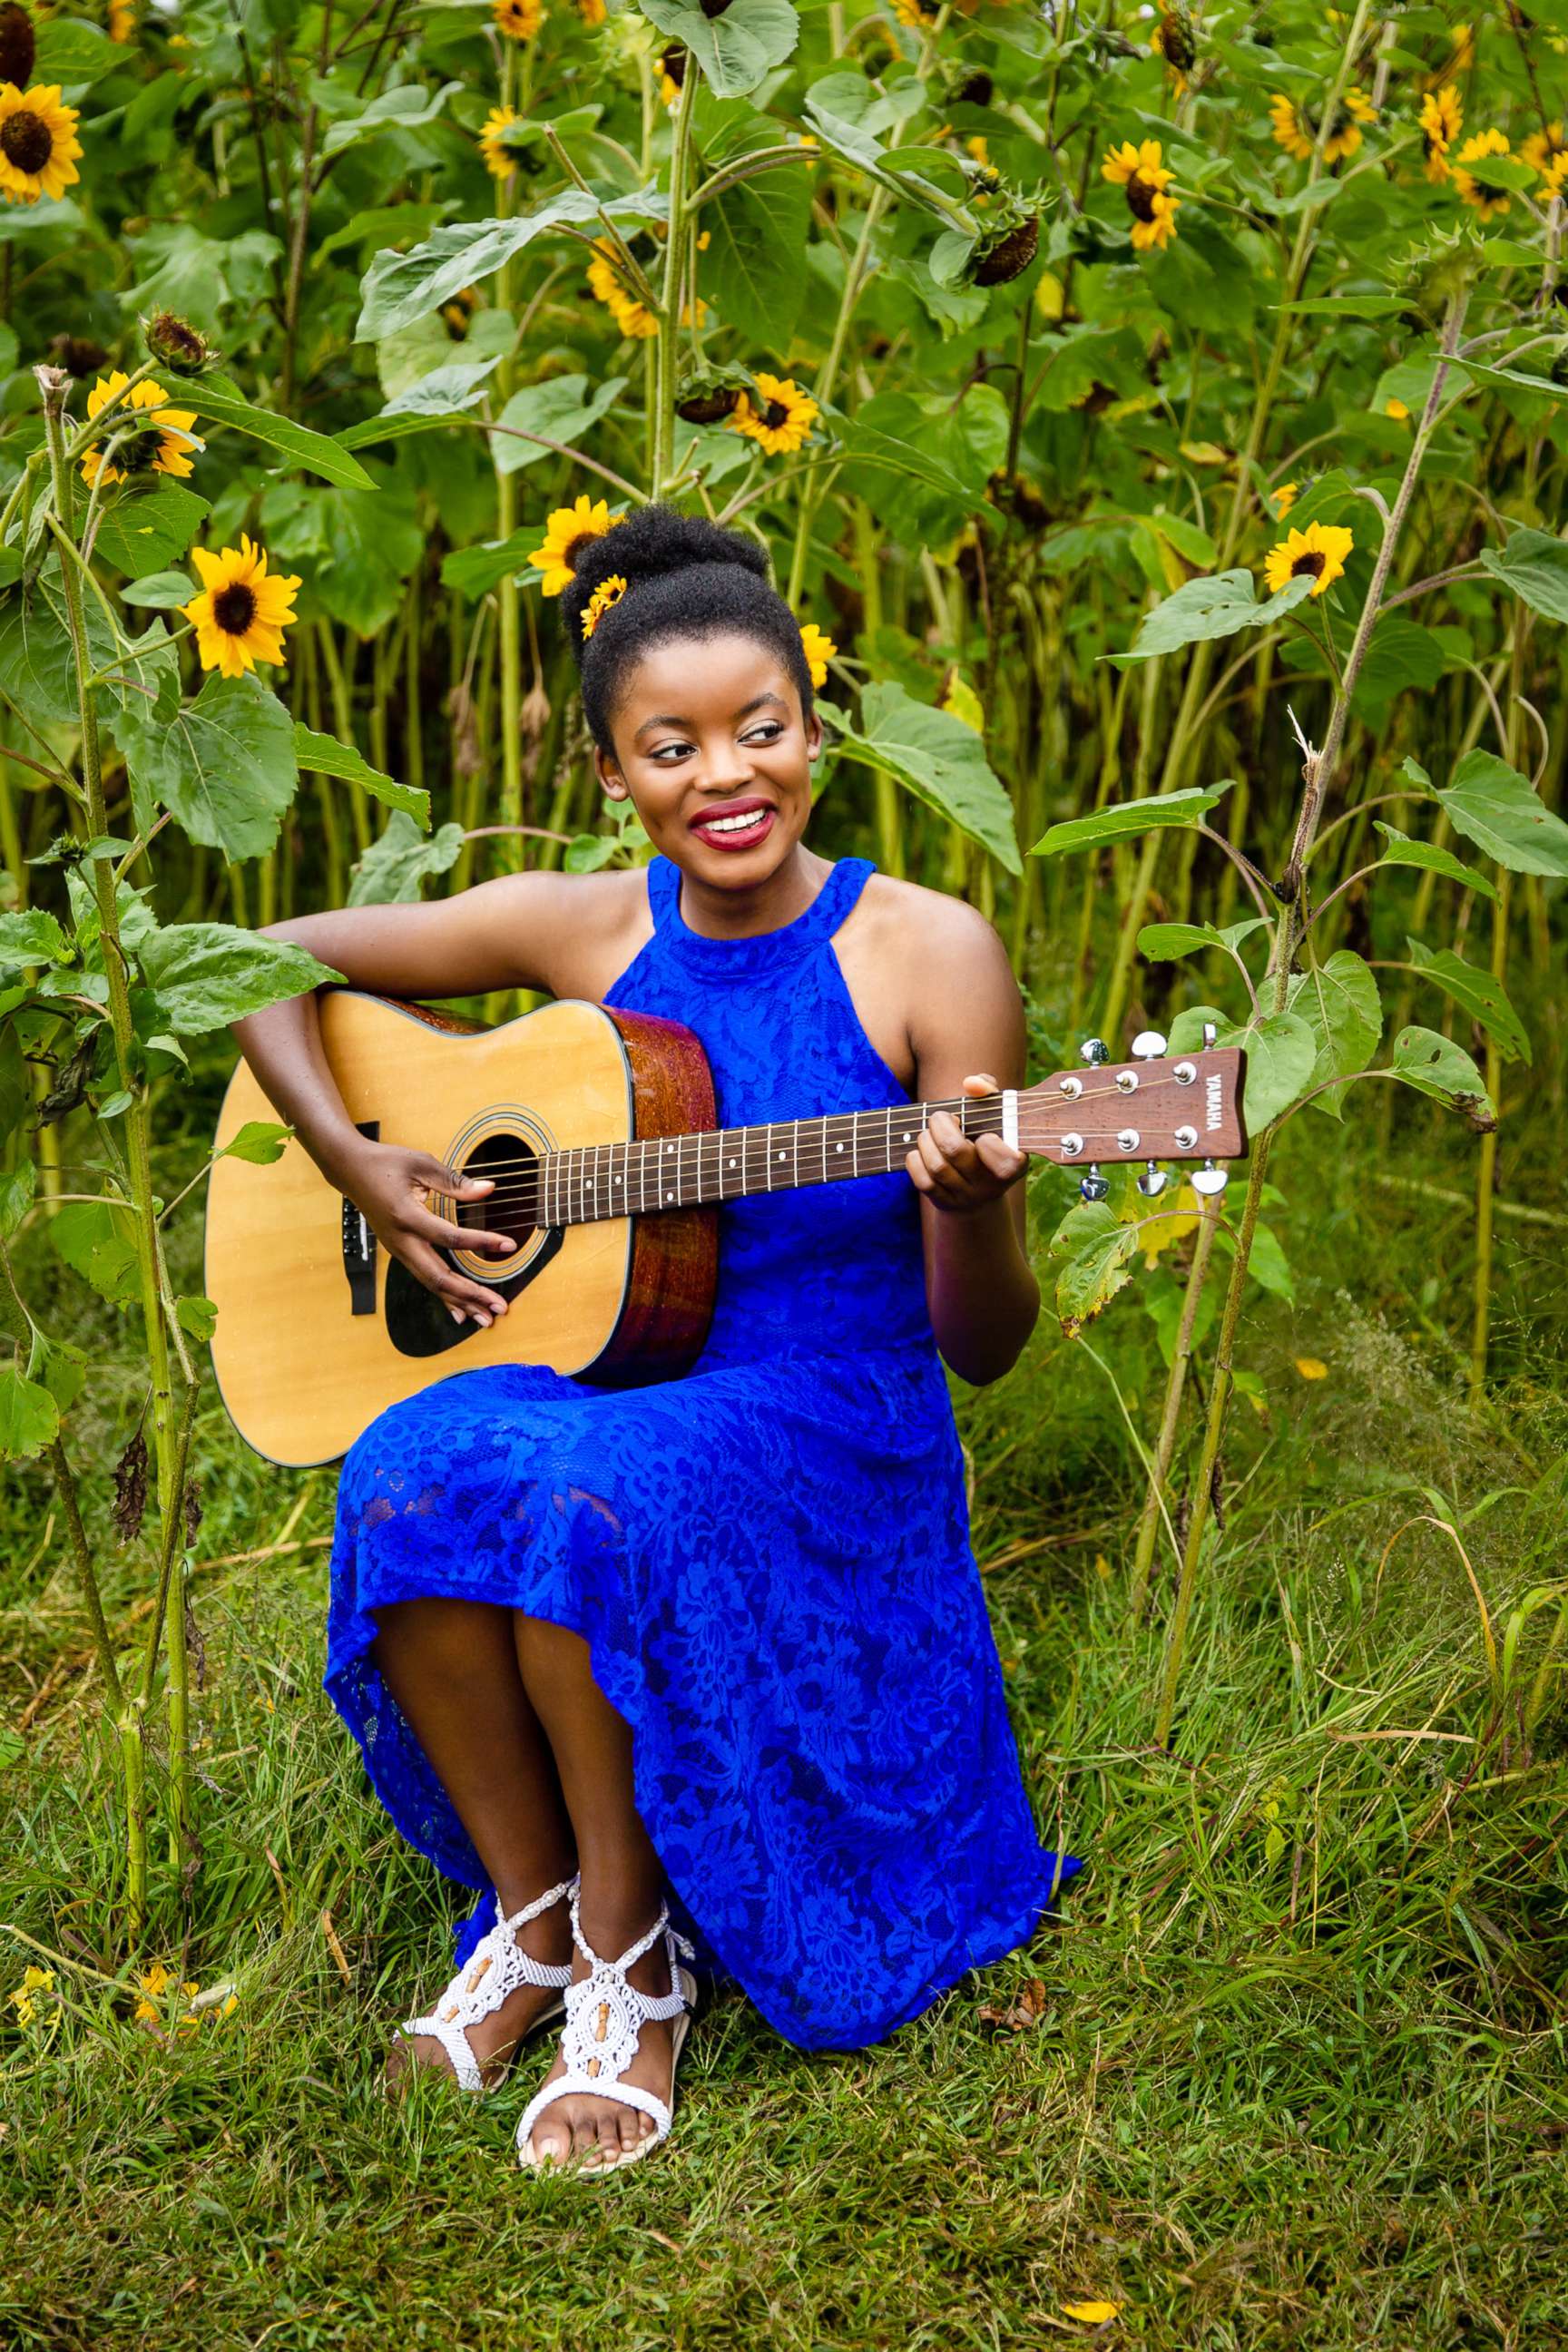 PHOTO: Minneapolis teen musician Moyana Olivia poses with her guitar in an undated photo. Olivia has shed light on racial injustice in America through her music video "X-Ray".